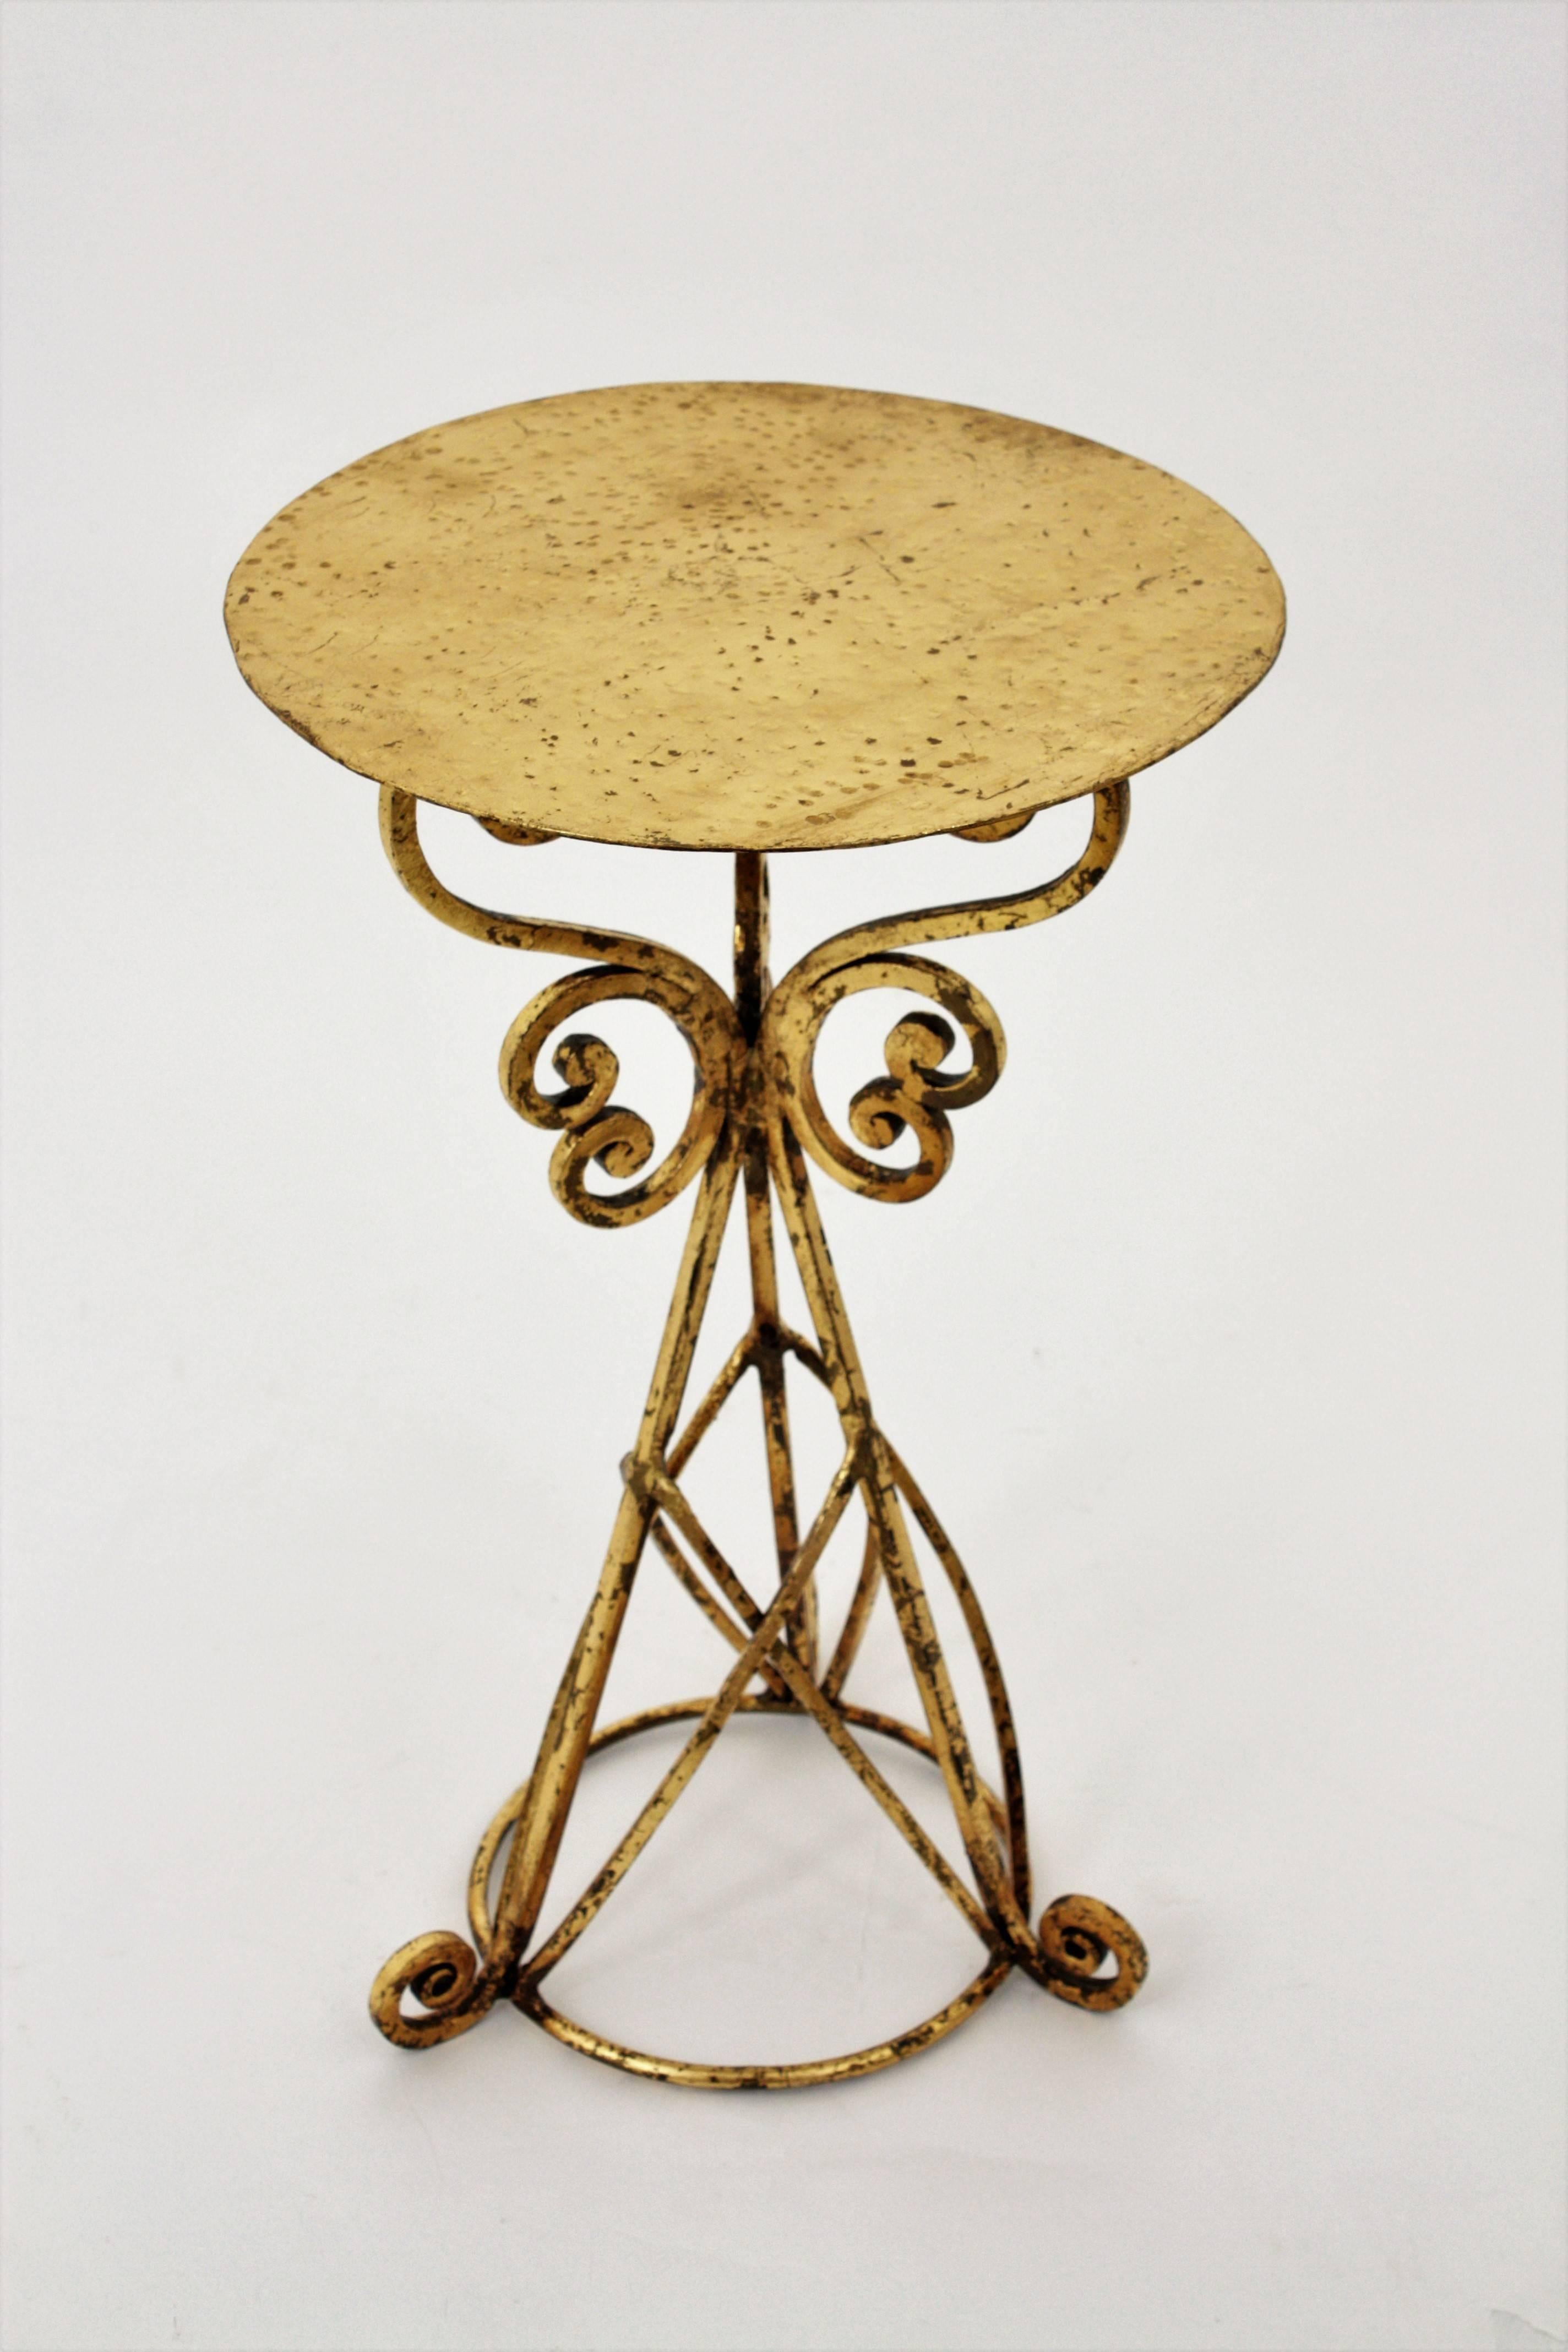 Very beautiful Hollywood Regency design hand-hammered iron table or gueridon with gold leaf finish.
Spain, 1940s